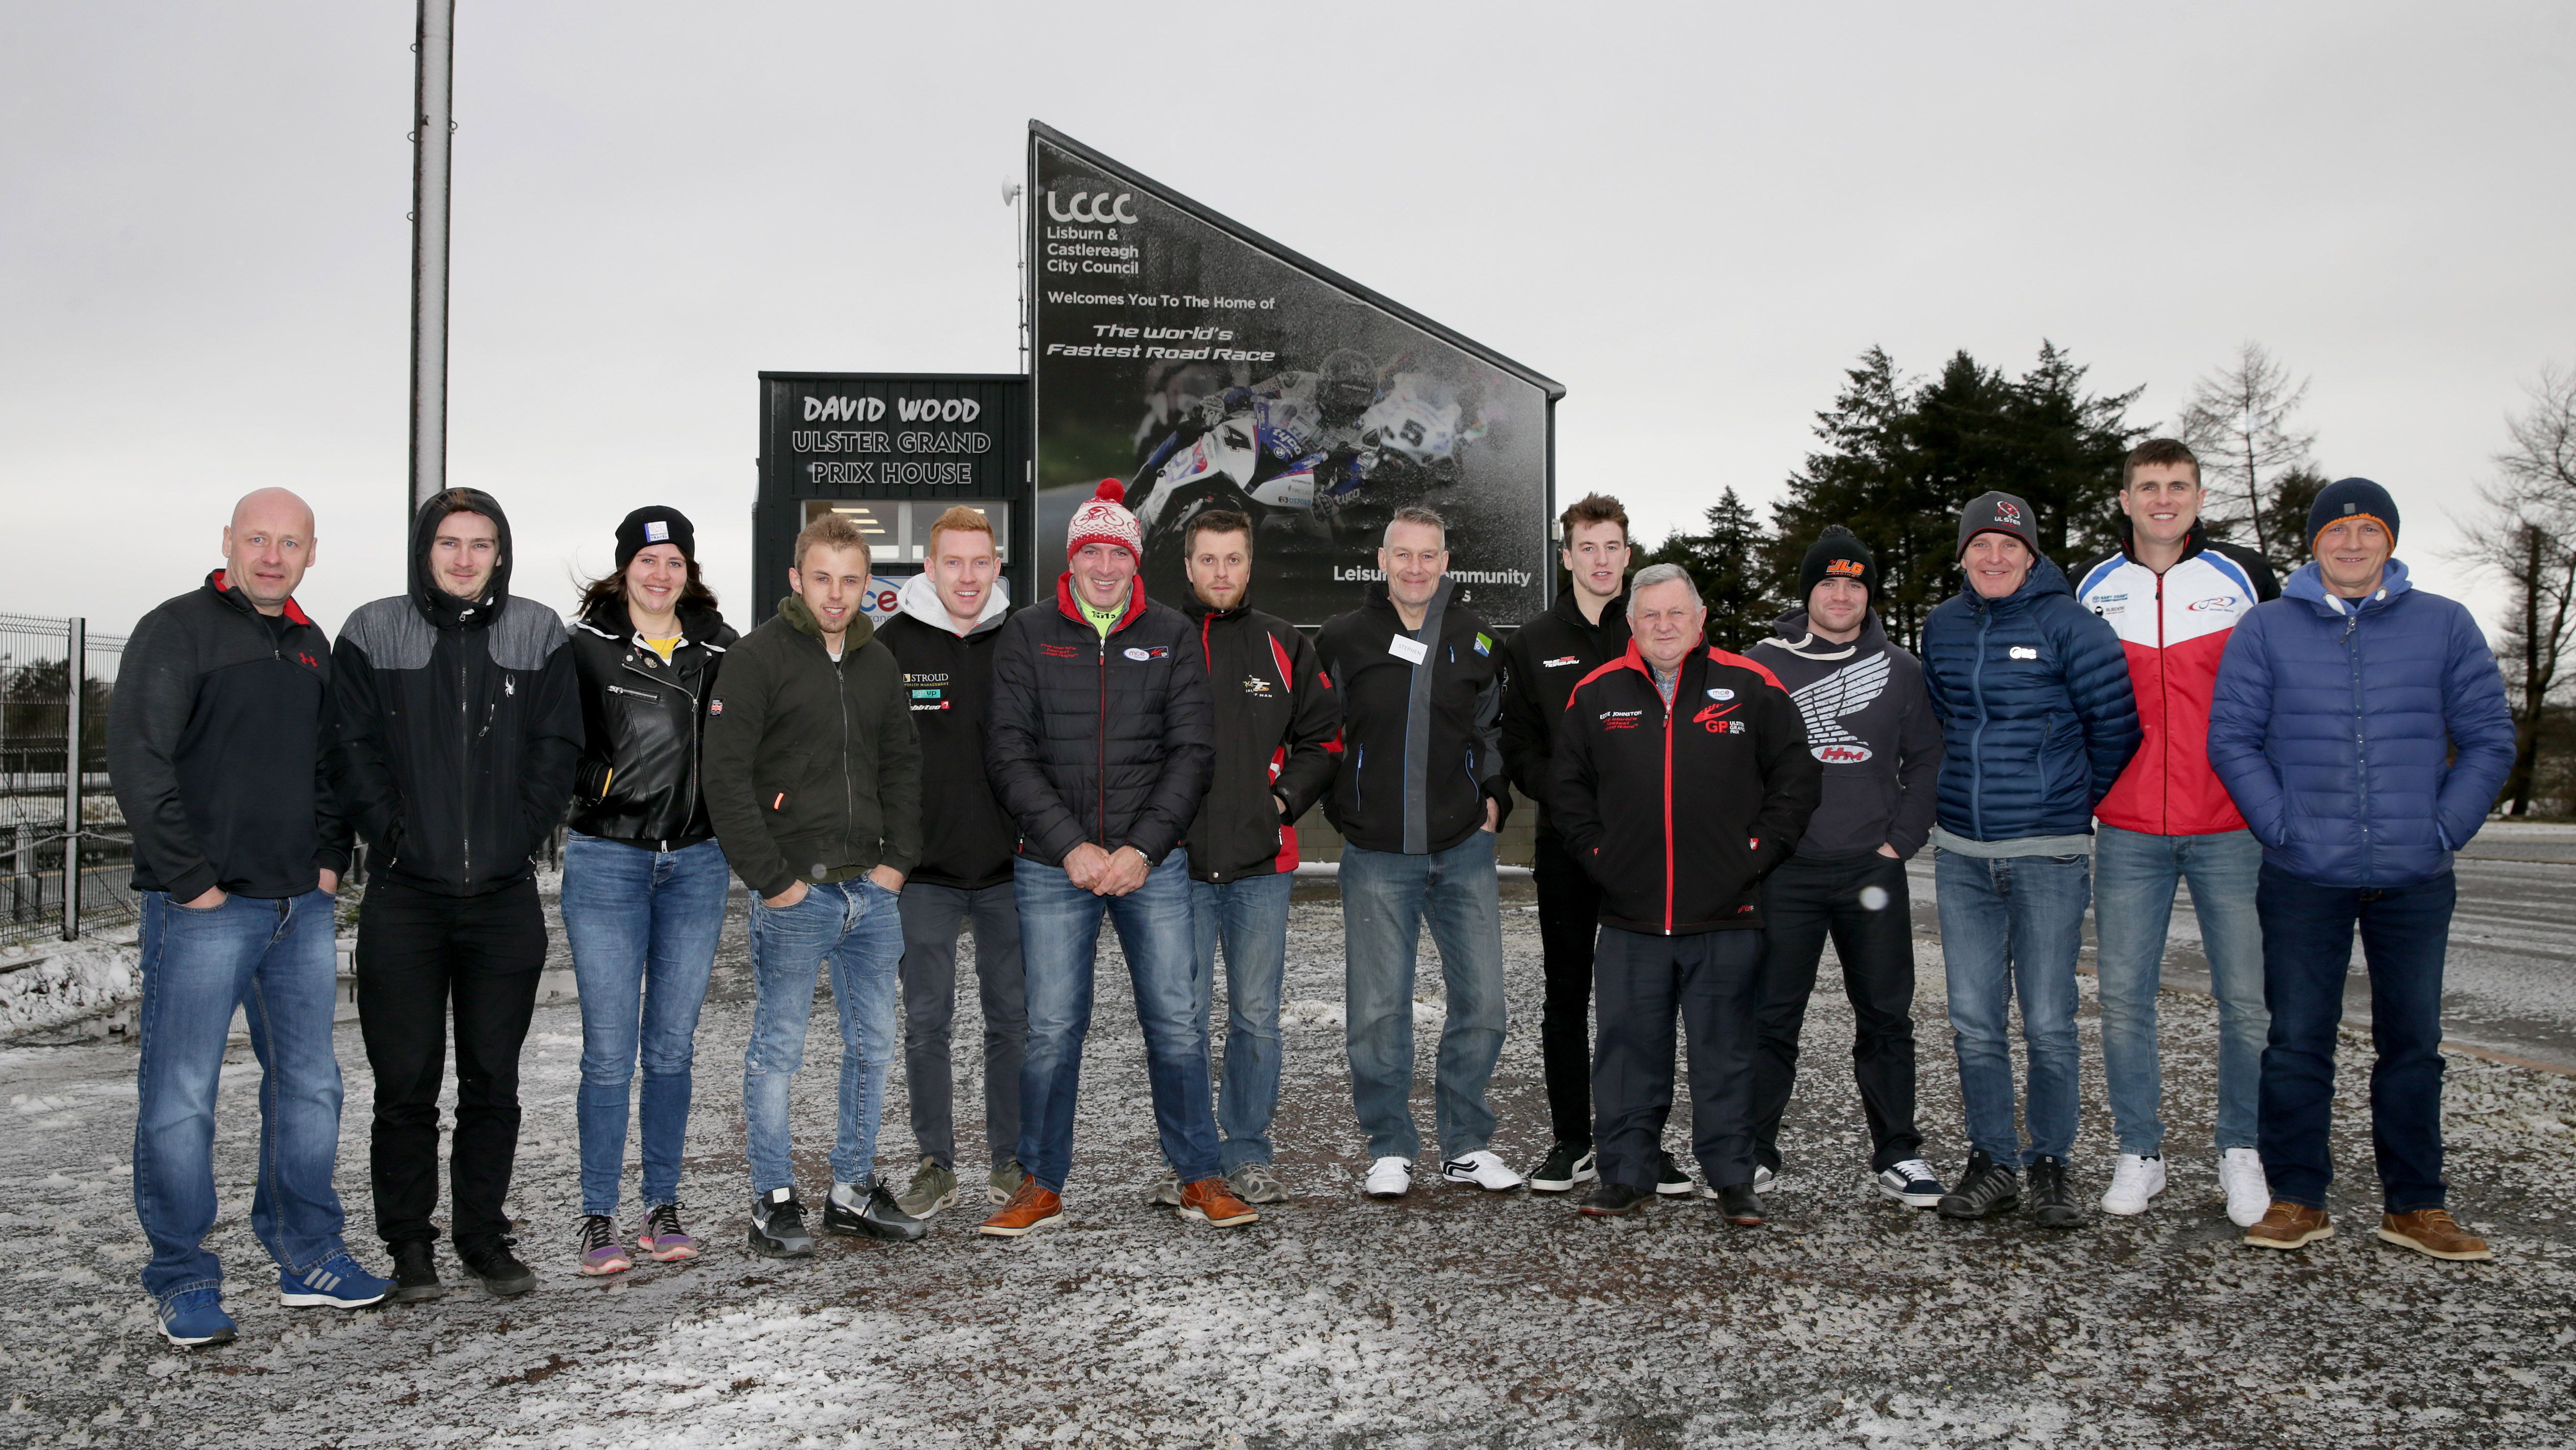 MCE Ulster Grand Prix organisers introduce compulsory training for newcomers